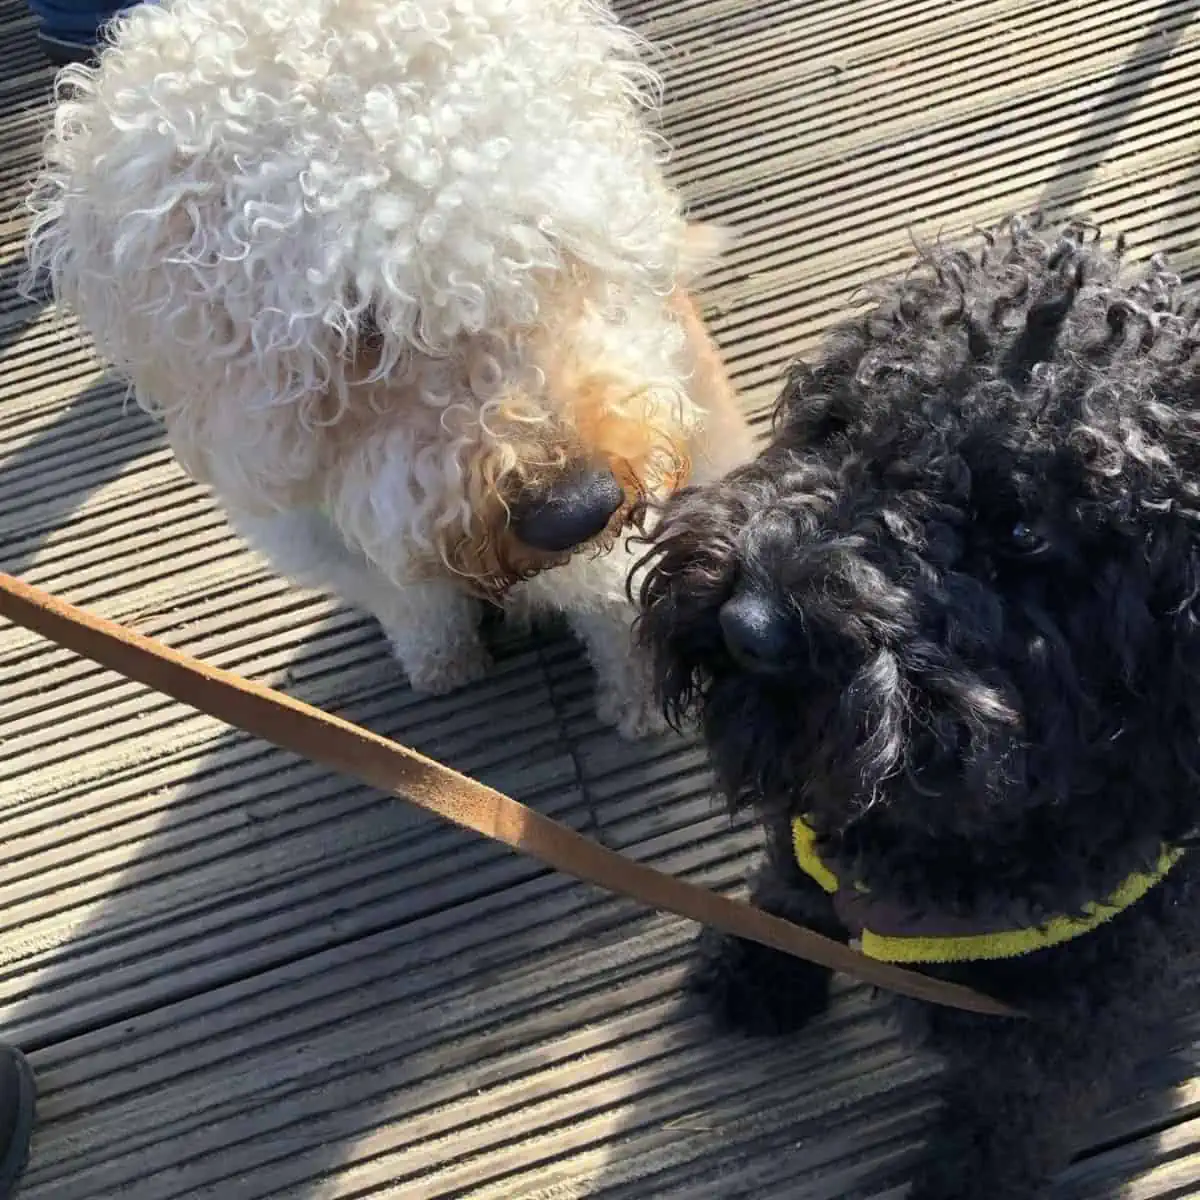 Labradoodle sniffs another dog